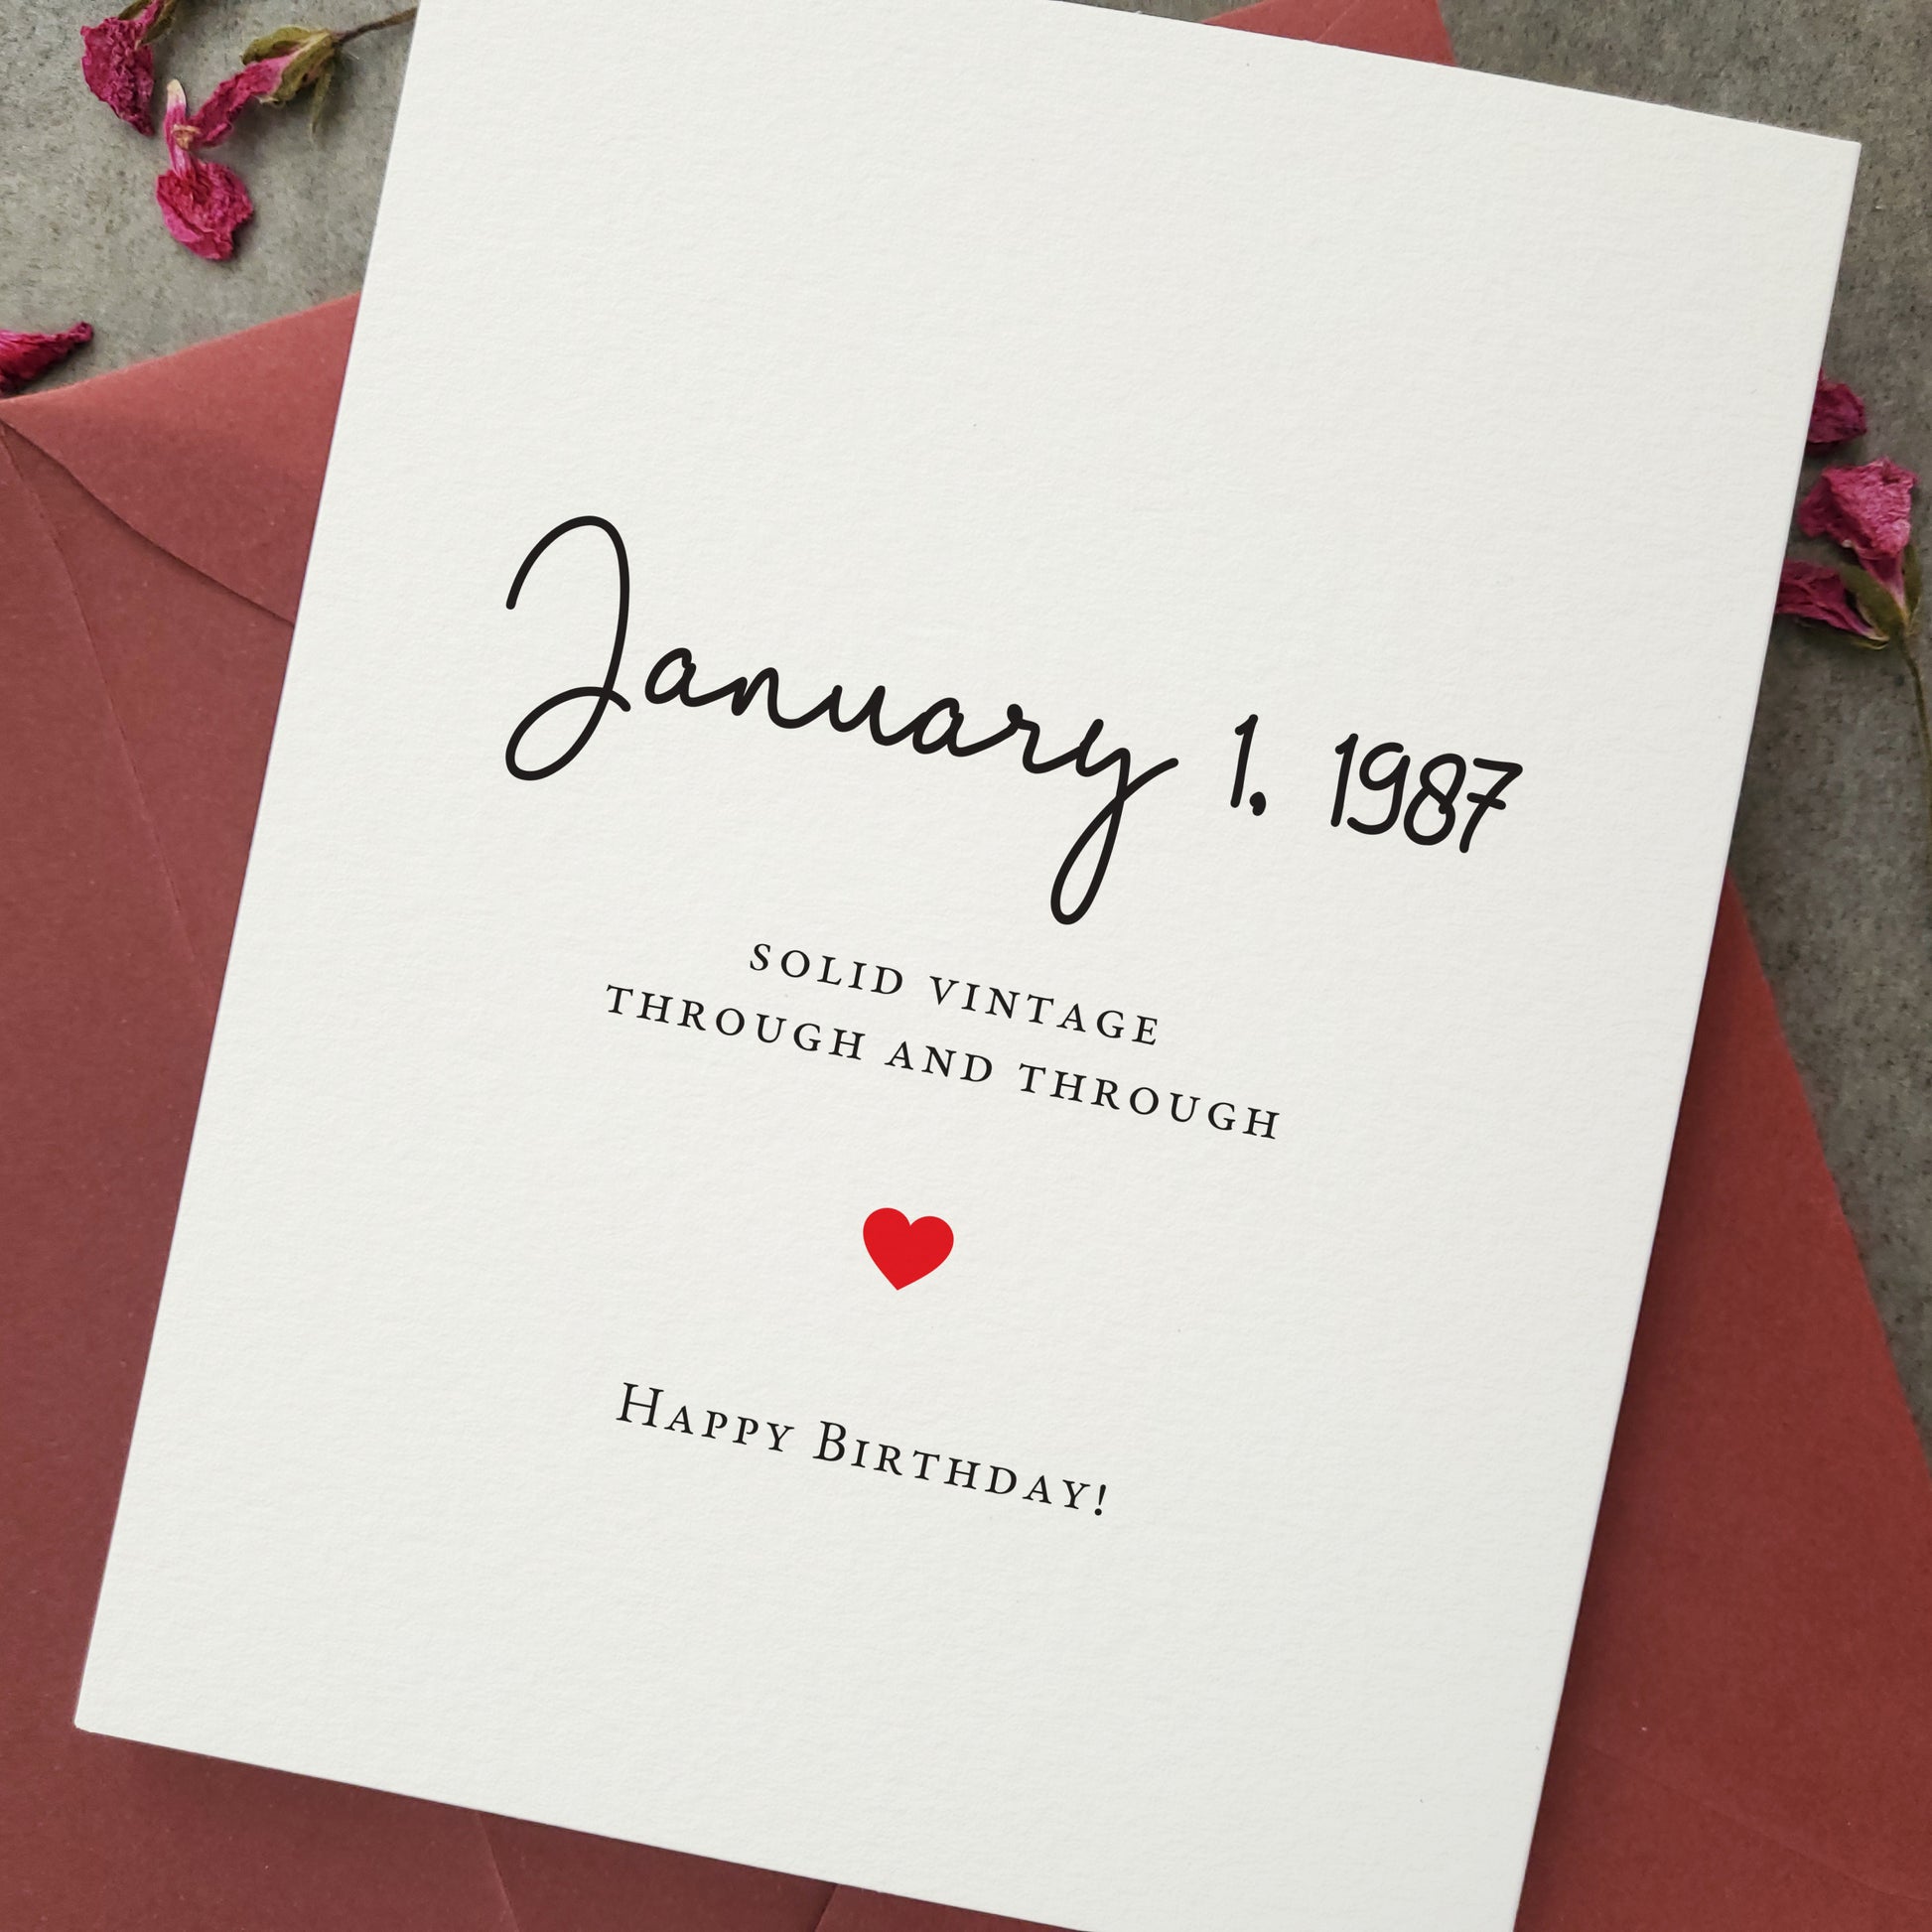 personalized funny happy birthday card with date of birth - XOXOKristen